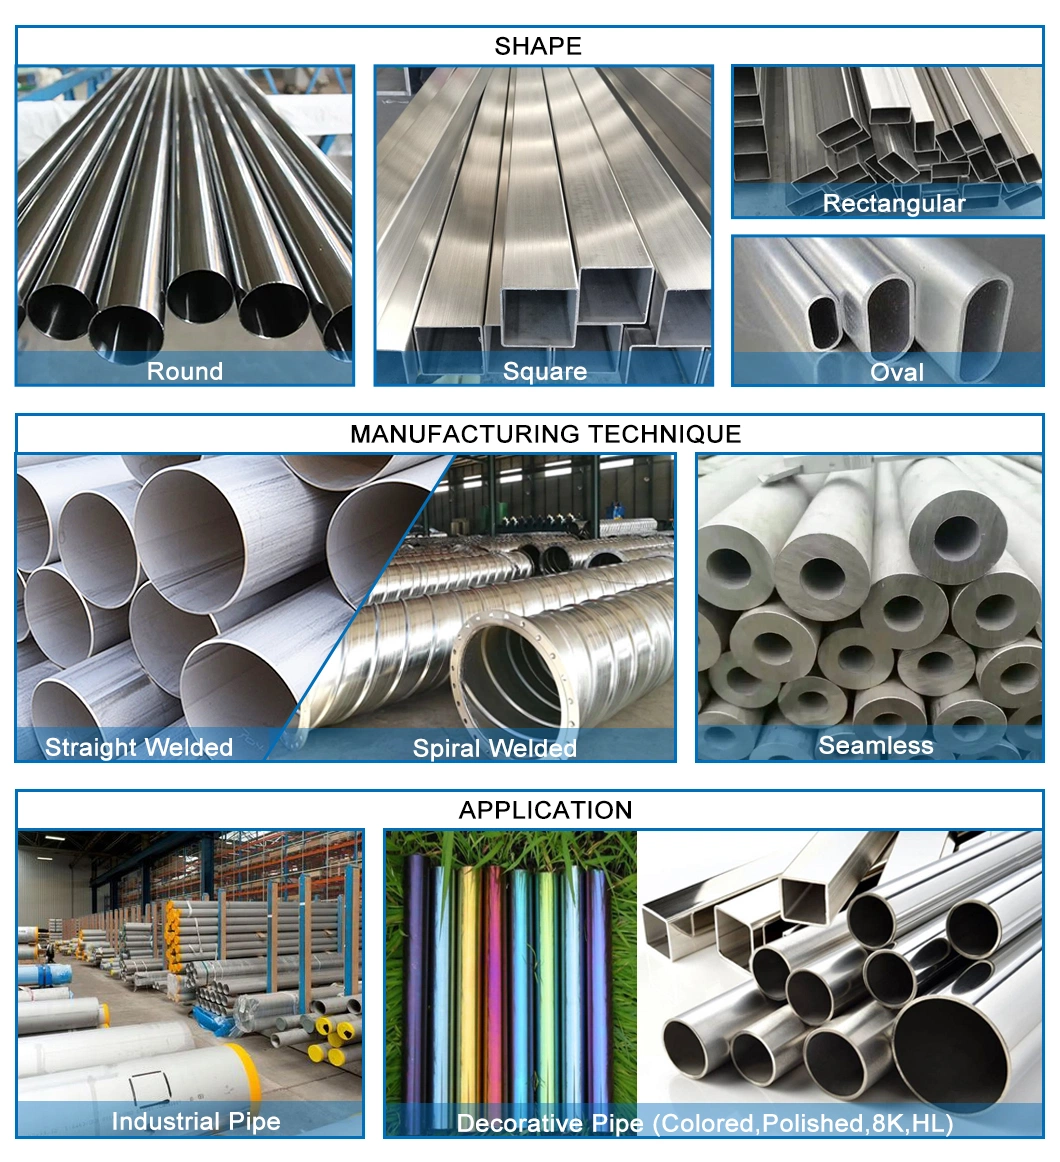 Acier Inoxydable Ss 201 202 301 304 Welded Tubing 316 316L 321 409 904L 2205 Stainless Steel Round Tube in Competitive Price Per Ton